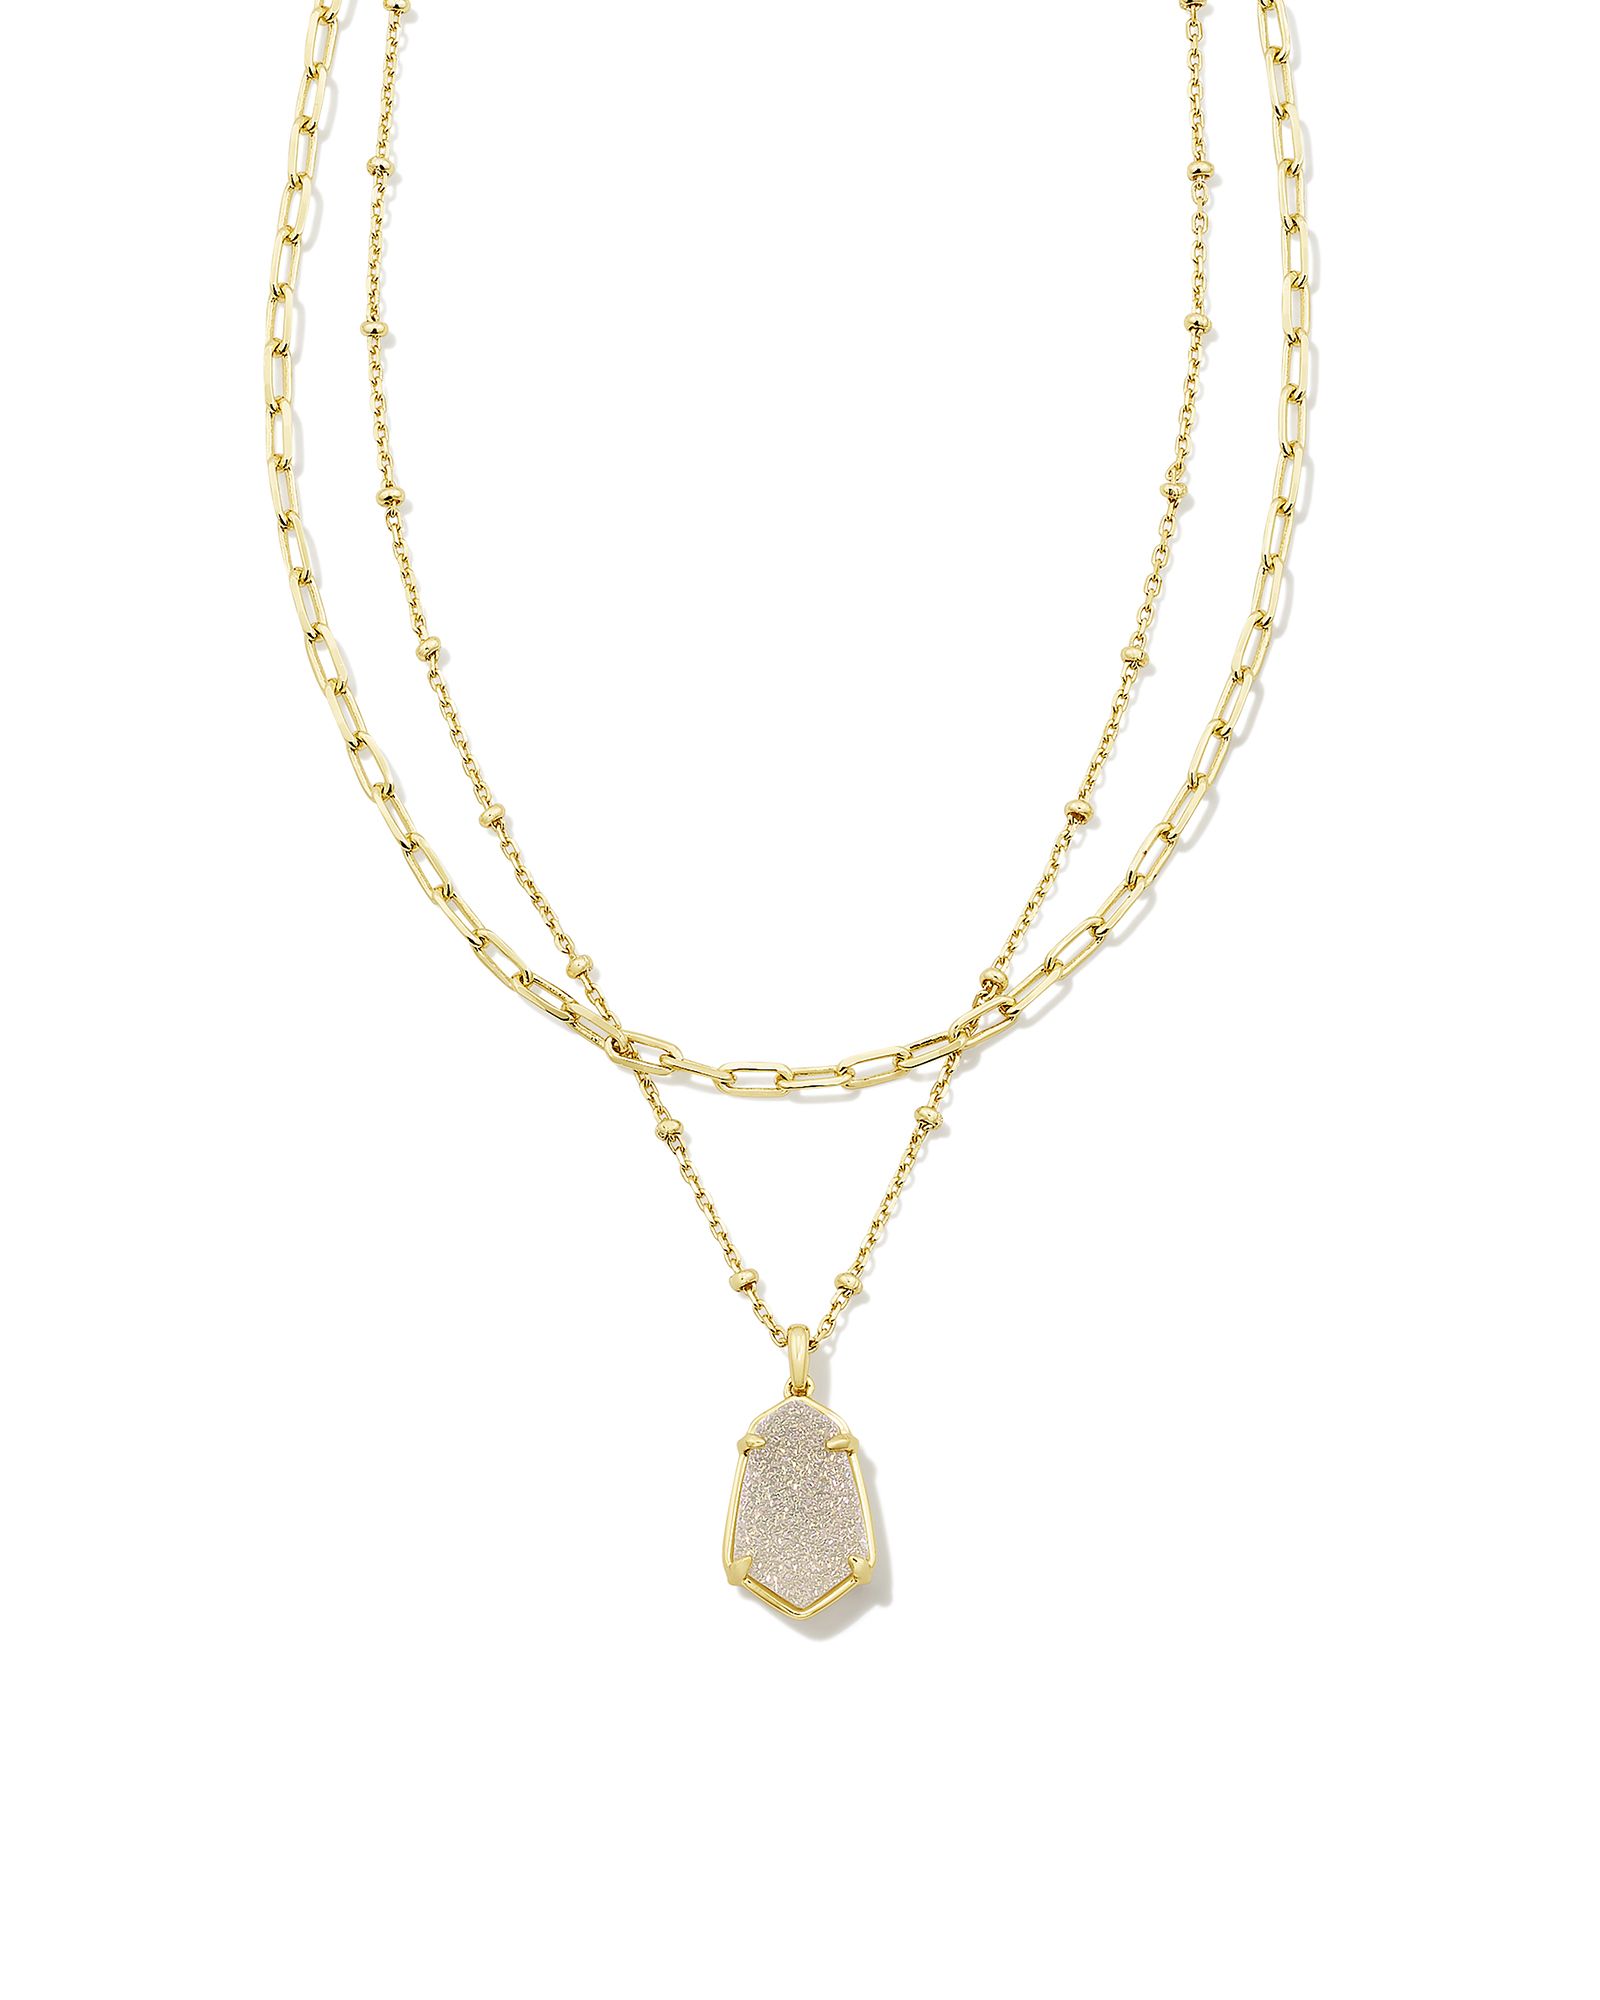 Alexandria Gold Multi Strand Necklace in Iridescent Clear Rock Crystal | Kendra Scott